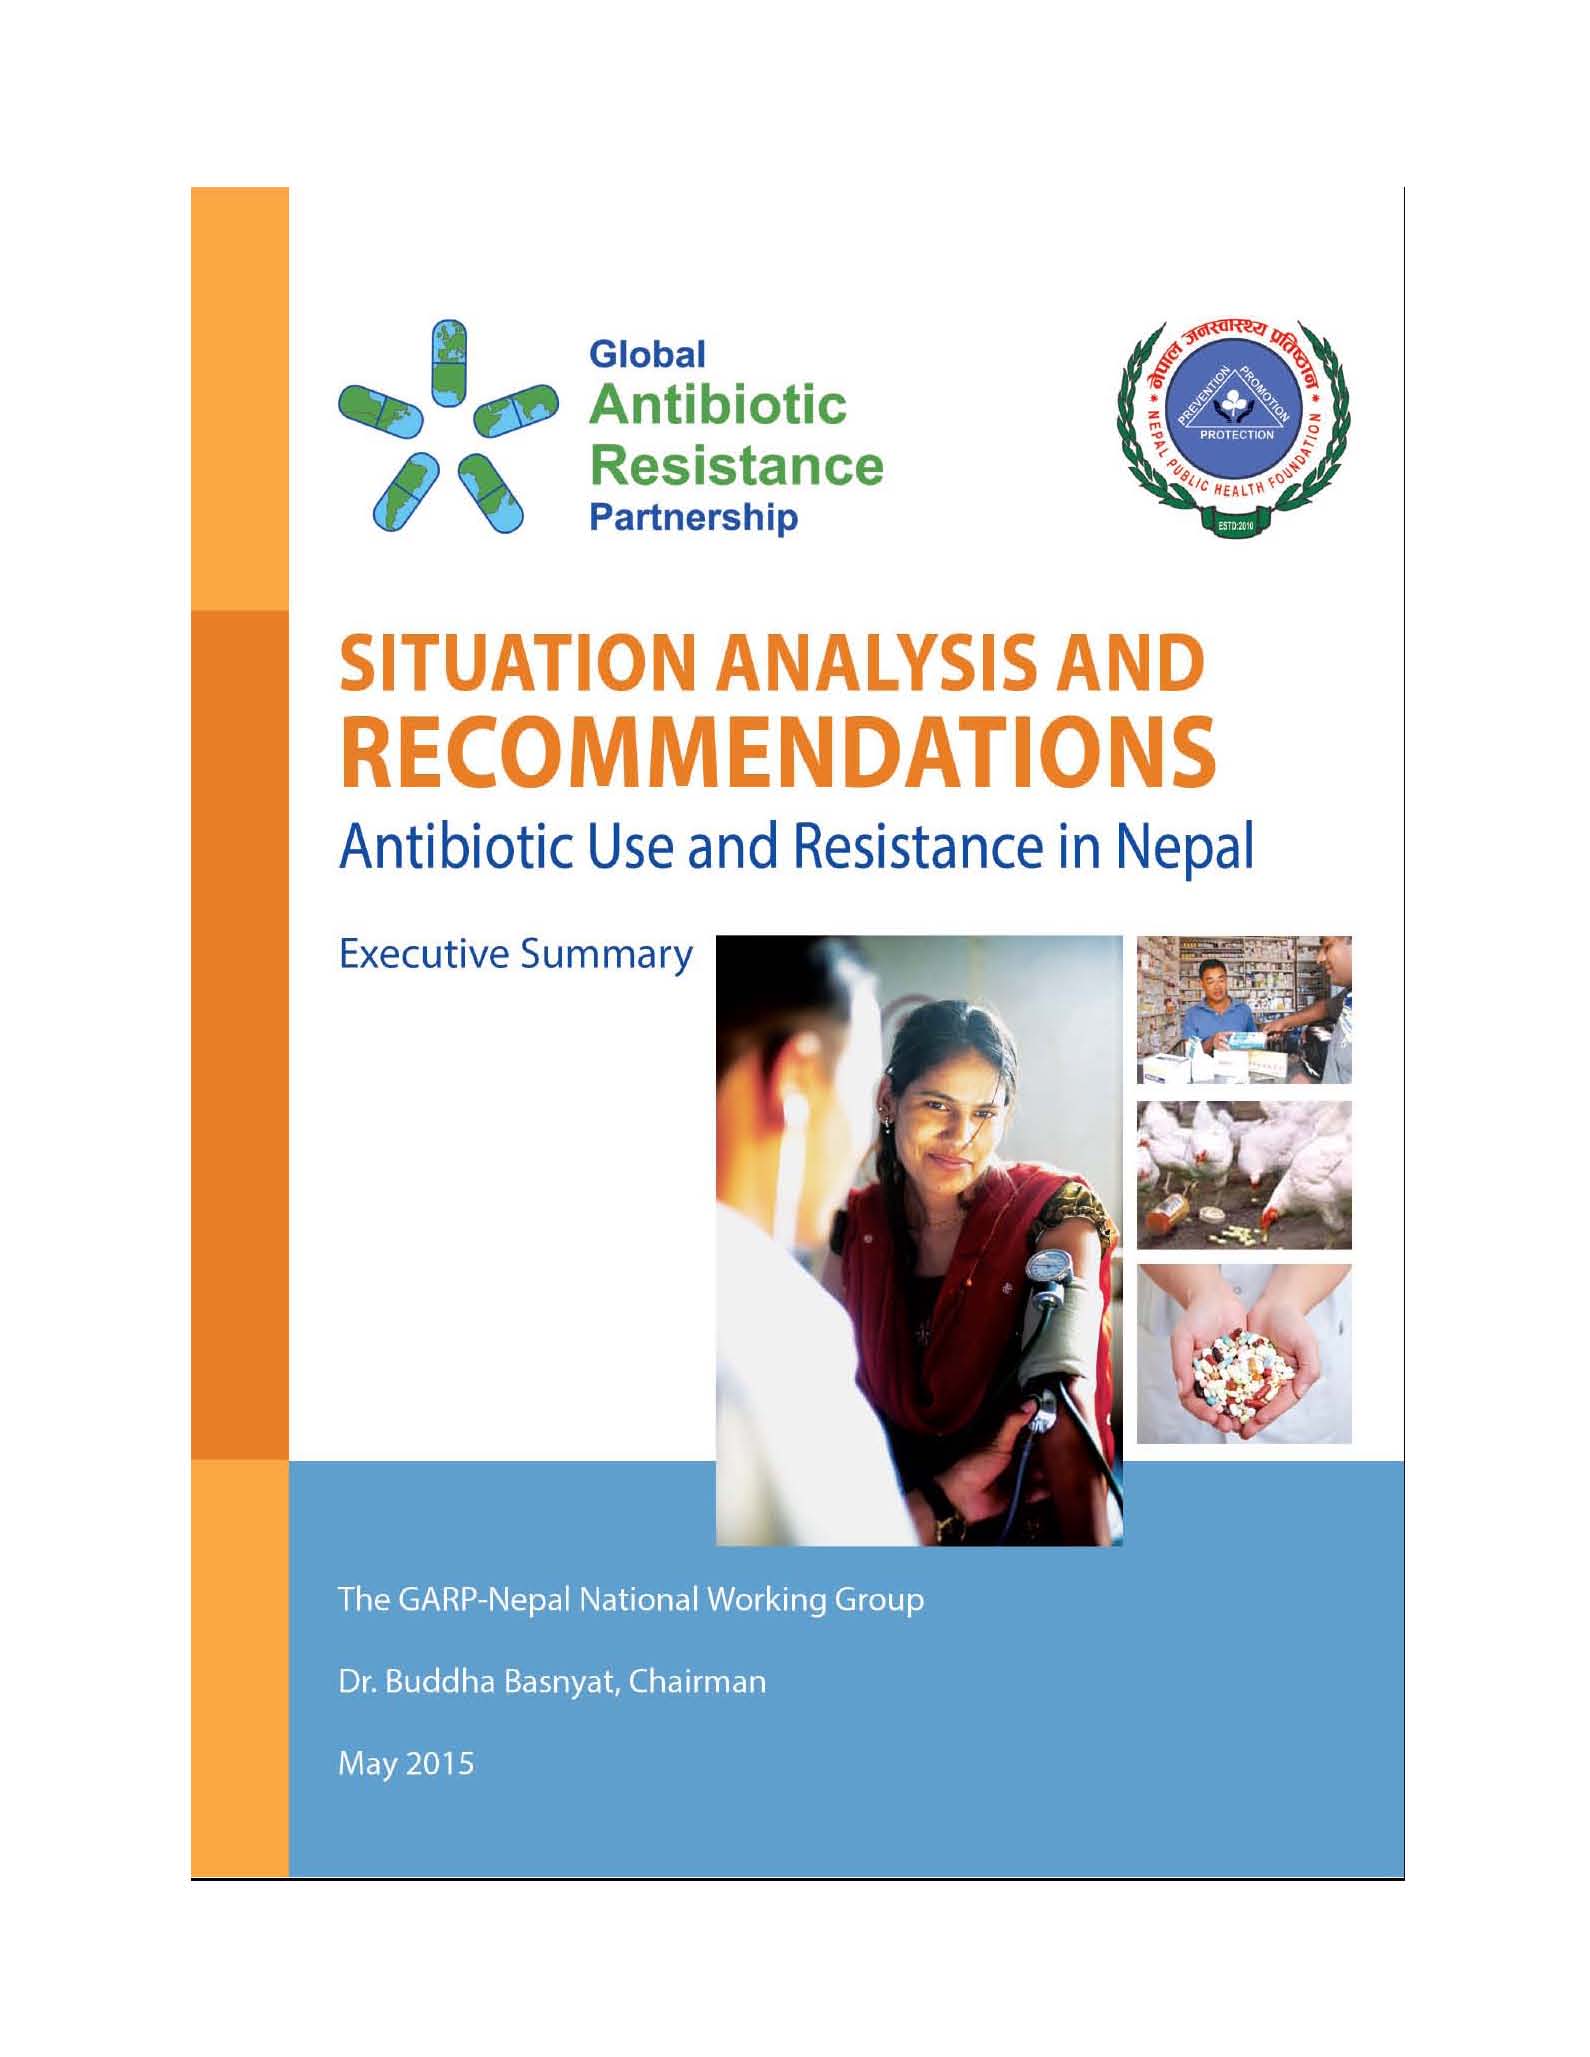 Executive Summary-Situation Analysis and Recommendations: Antibiotic Use and Resistance in Nepal